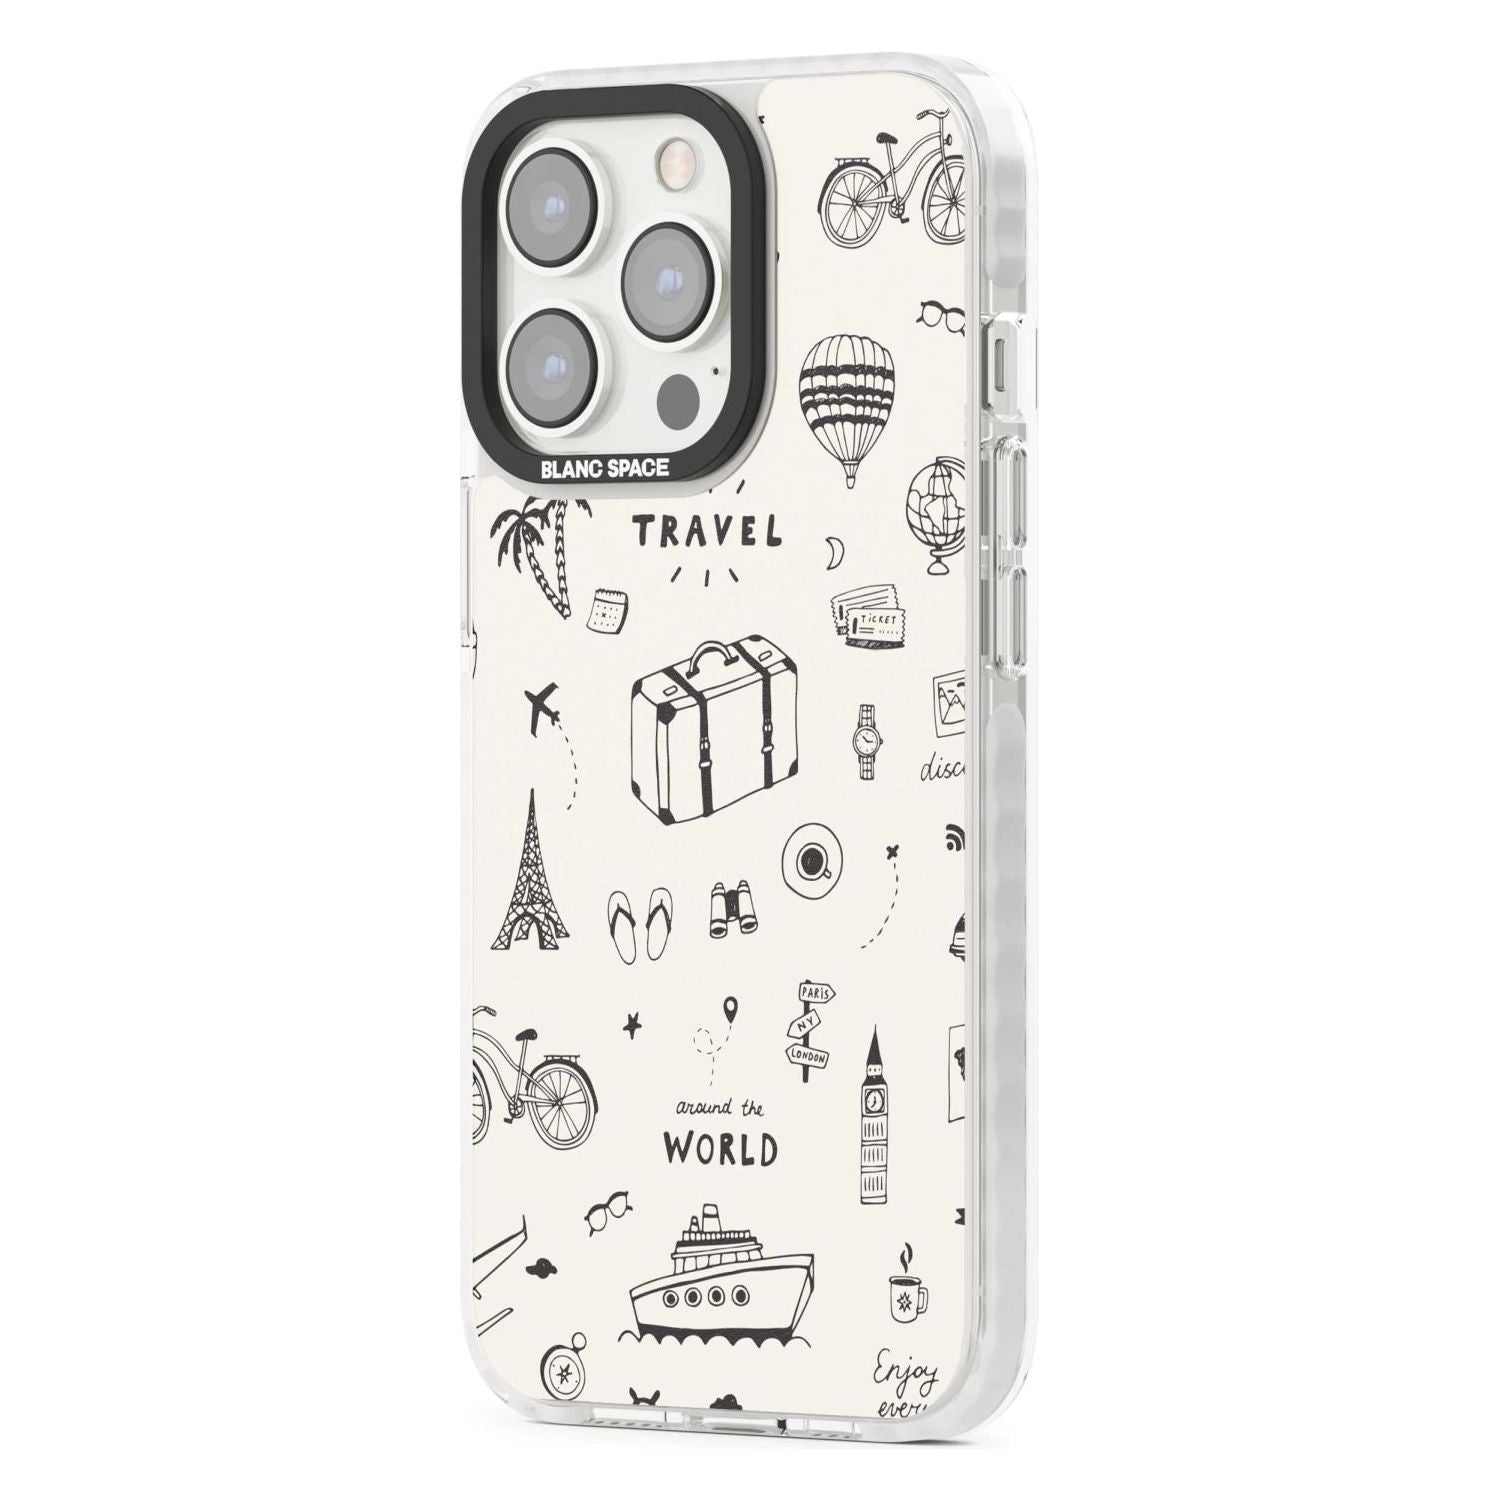 Cute Travel Pattern, White on Phone Case iPhone 15 Pro Max / Black Impact Case,iPhone 15 Plus / Black Impact Case,iPhone 15 Pro / Black Impact Case,iPhone 15 / Black Impact Case,iPhone 15 Pro Max / Impact Case,iPhone 15 Plus / Impact Case,iPhone 15 Pro / Impact Case,iPhone 15 / Impact Case,iPhone 15 Pro Max / Magsafe Black Impact Case,iPhone 15 Plus / Magsafe Black Impact Case,iPhone 15 Pro / Magsafe Black Impact Case,iPhone 15 / Magsafe Black Impact Case,iPhone 14 Pro Max / Black Impact Case,iPhone 14 Plus